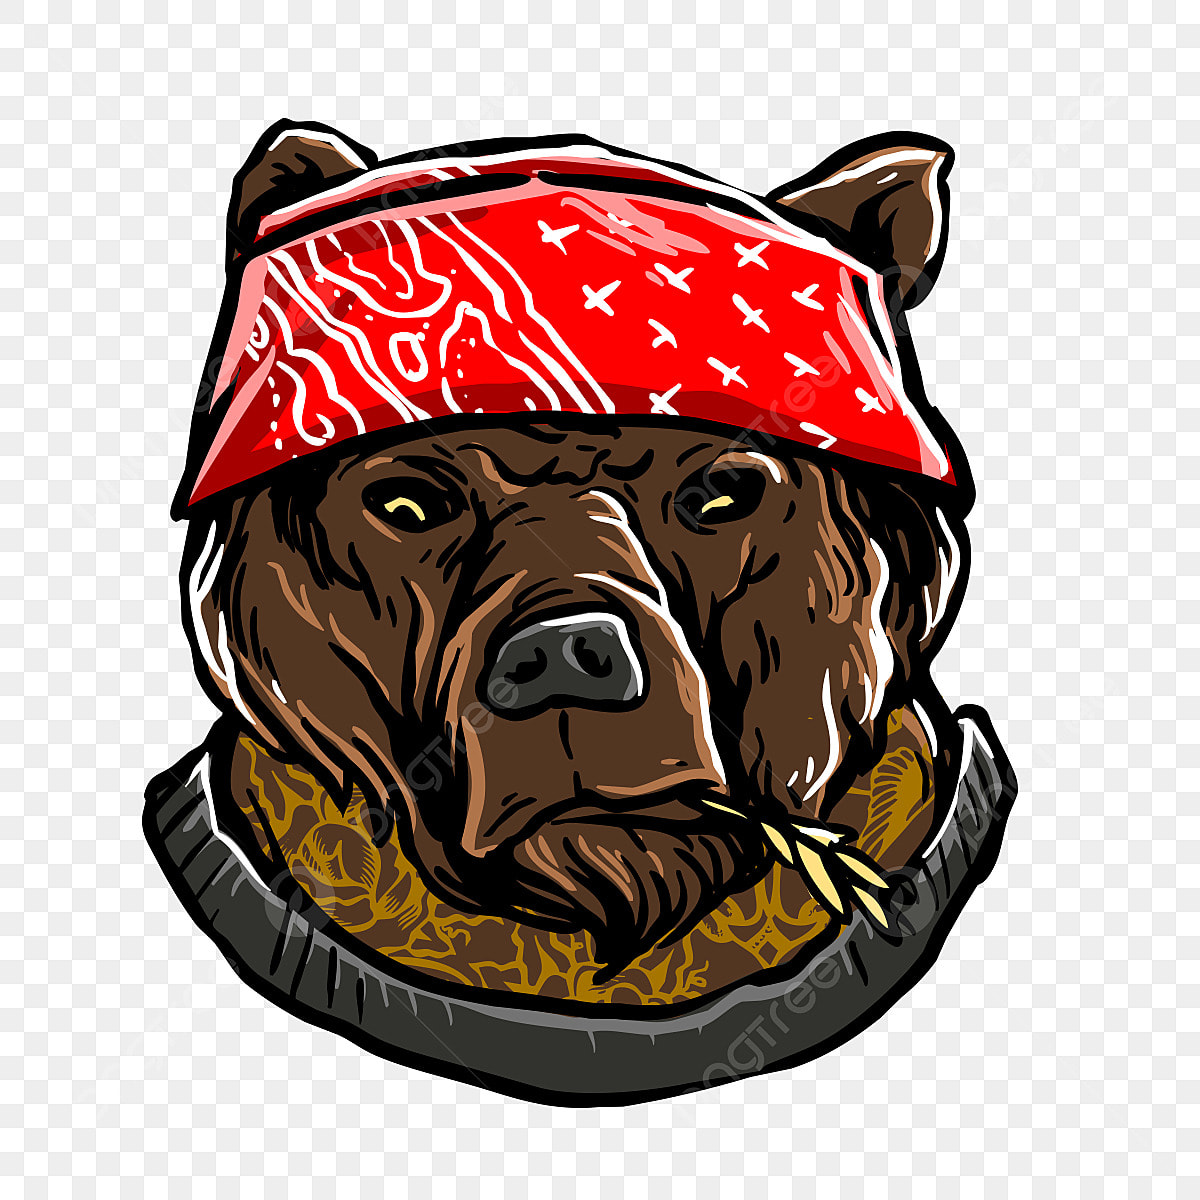 Gangster Bear PNG Picture, Bear Gangster, Animal, Gangster, Tattoo PNG Image For Free Download